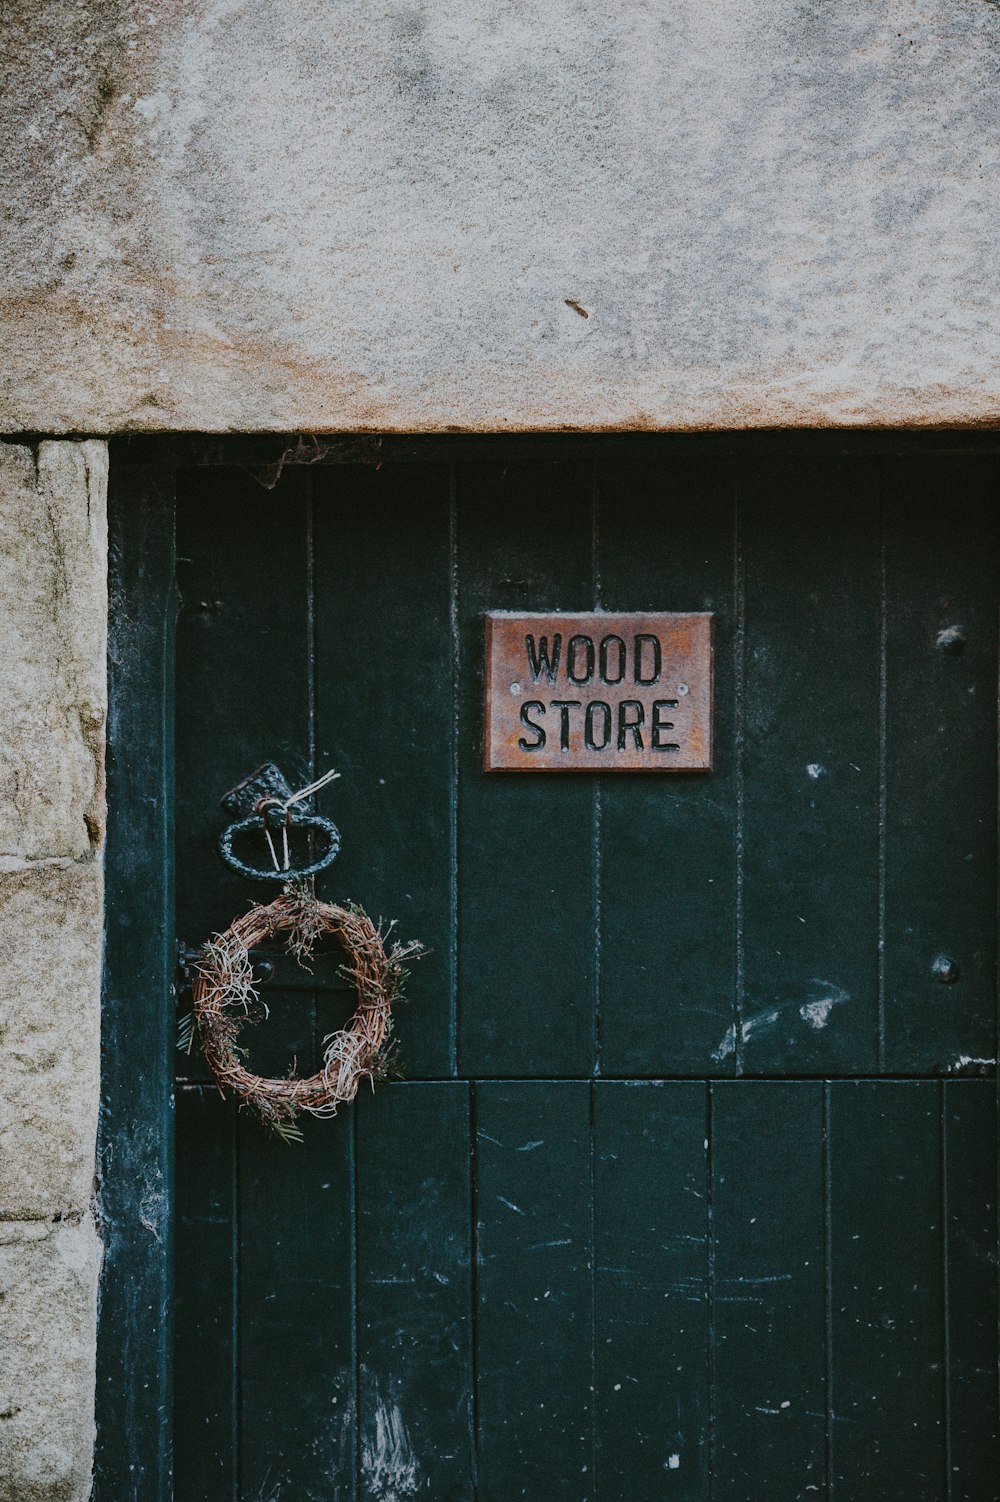 Wood Store signage on wall